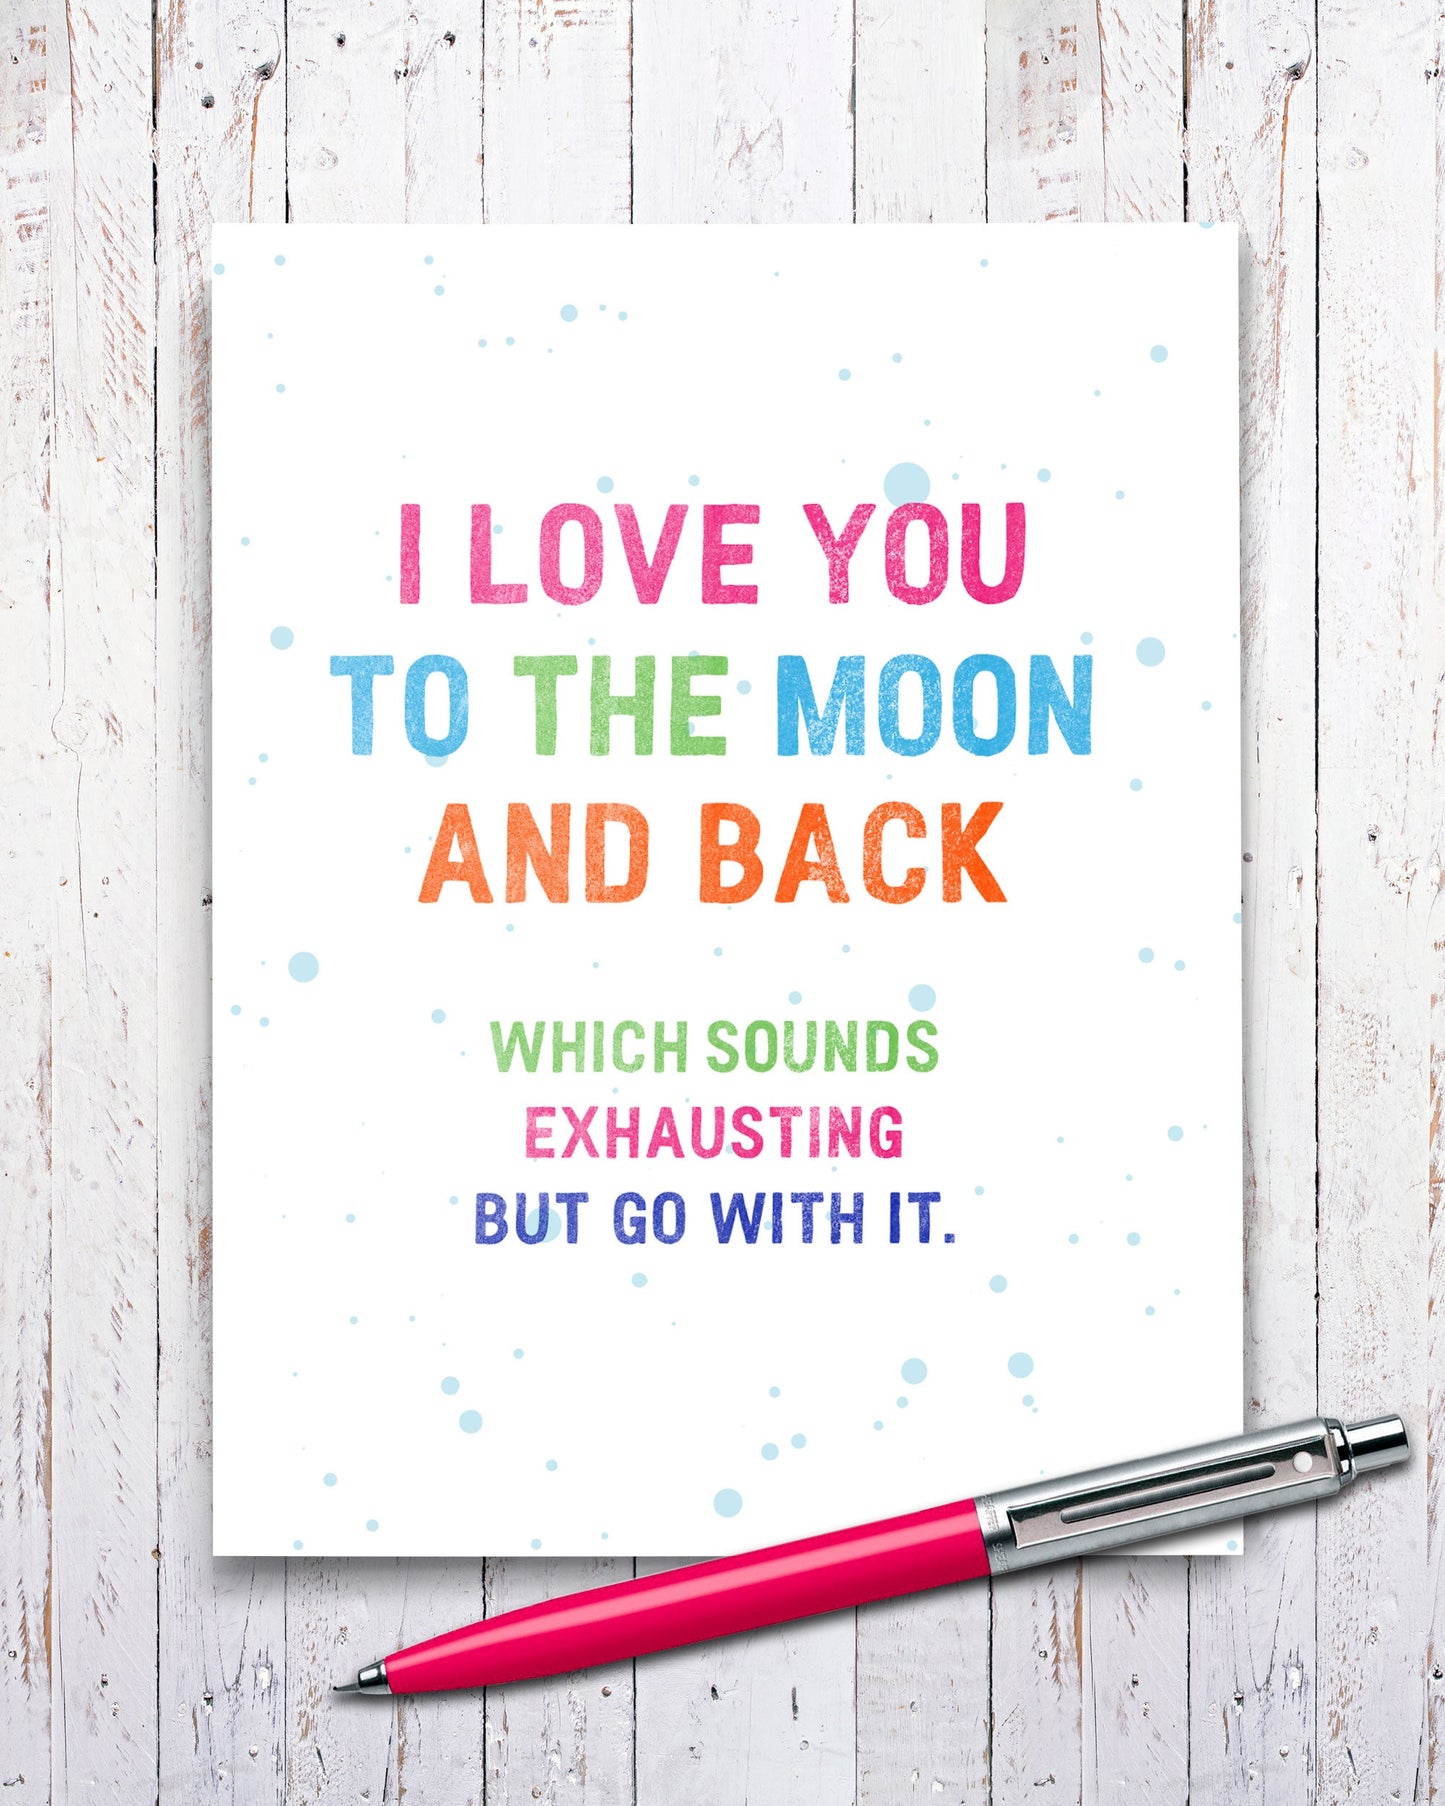 I Love You to the Moon Funny Card - Transit Design